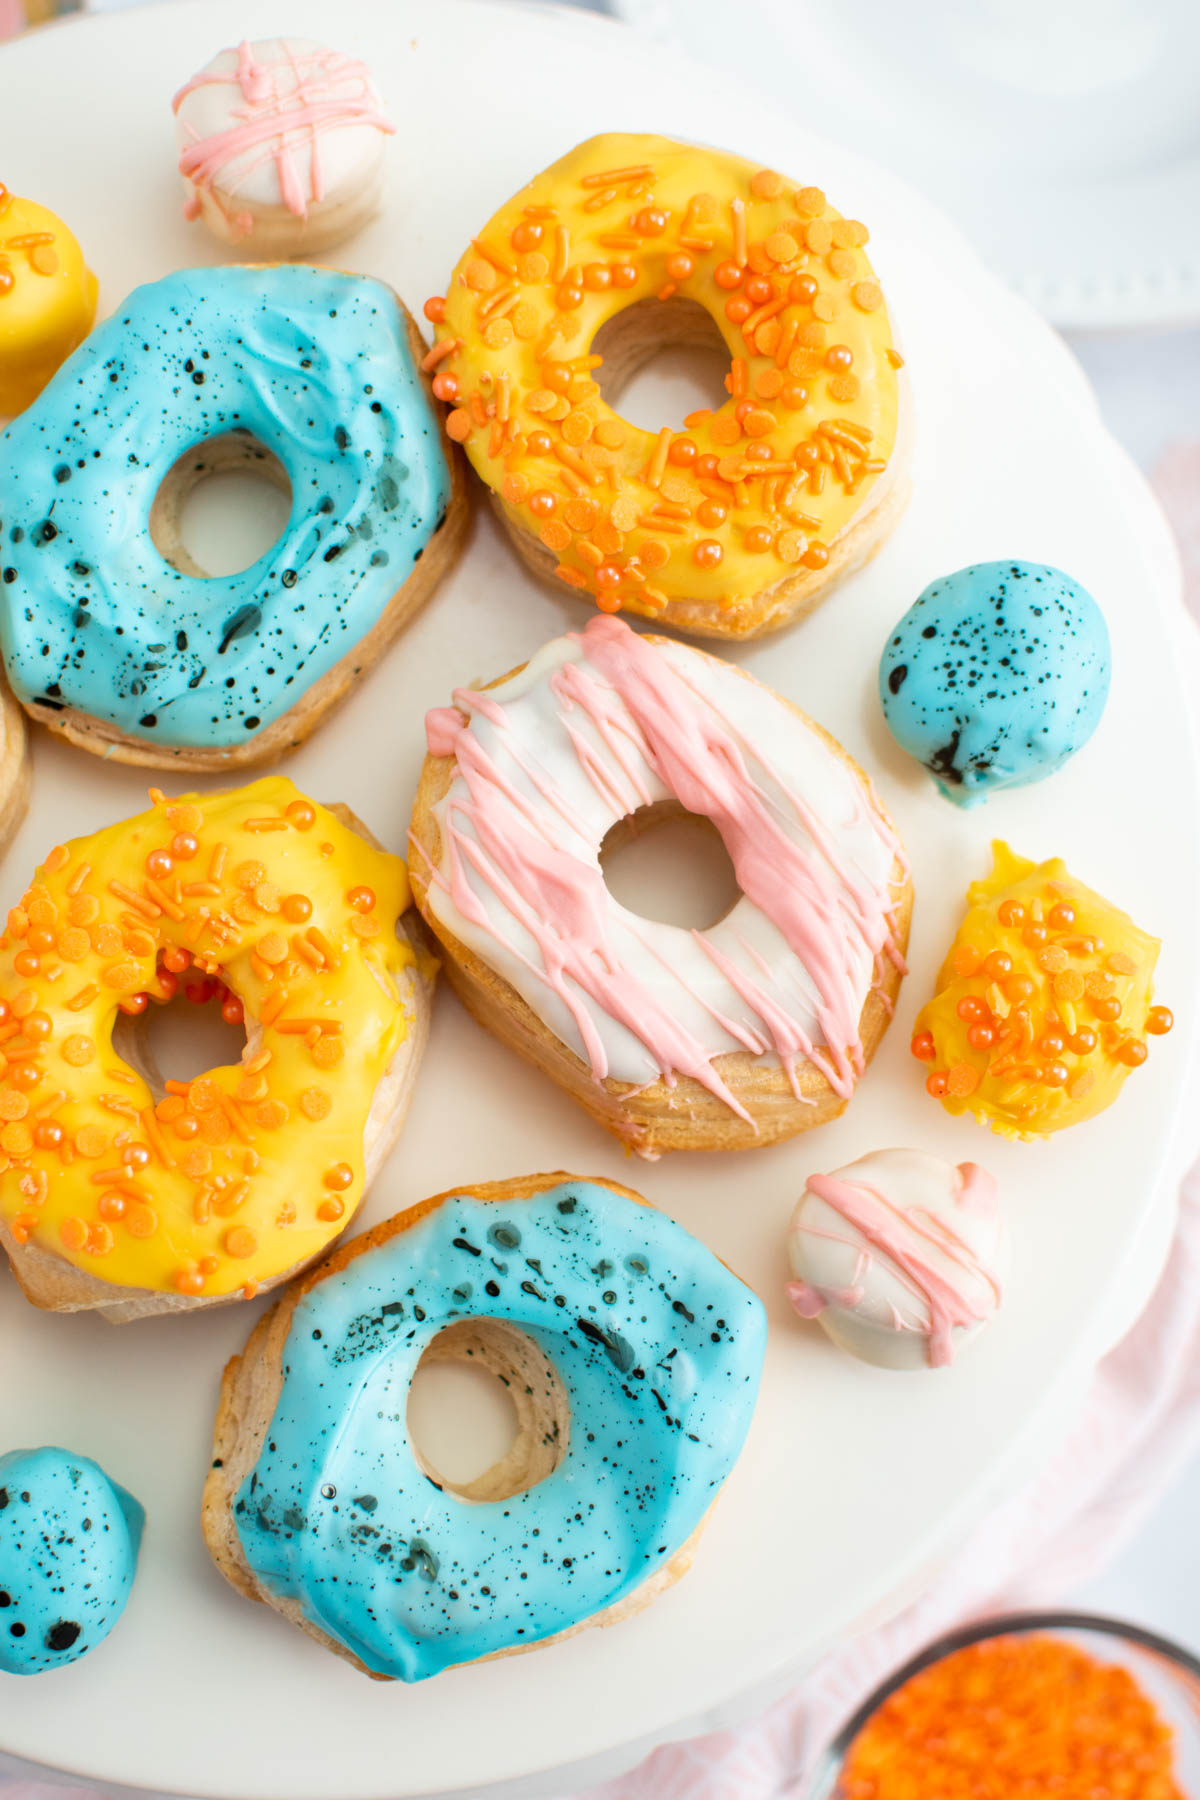 Several Easter decorated air fryer biscuit donuts and donut holes on white cake stand.